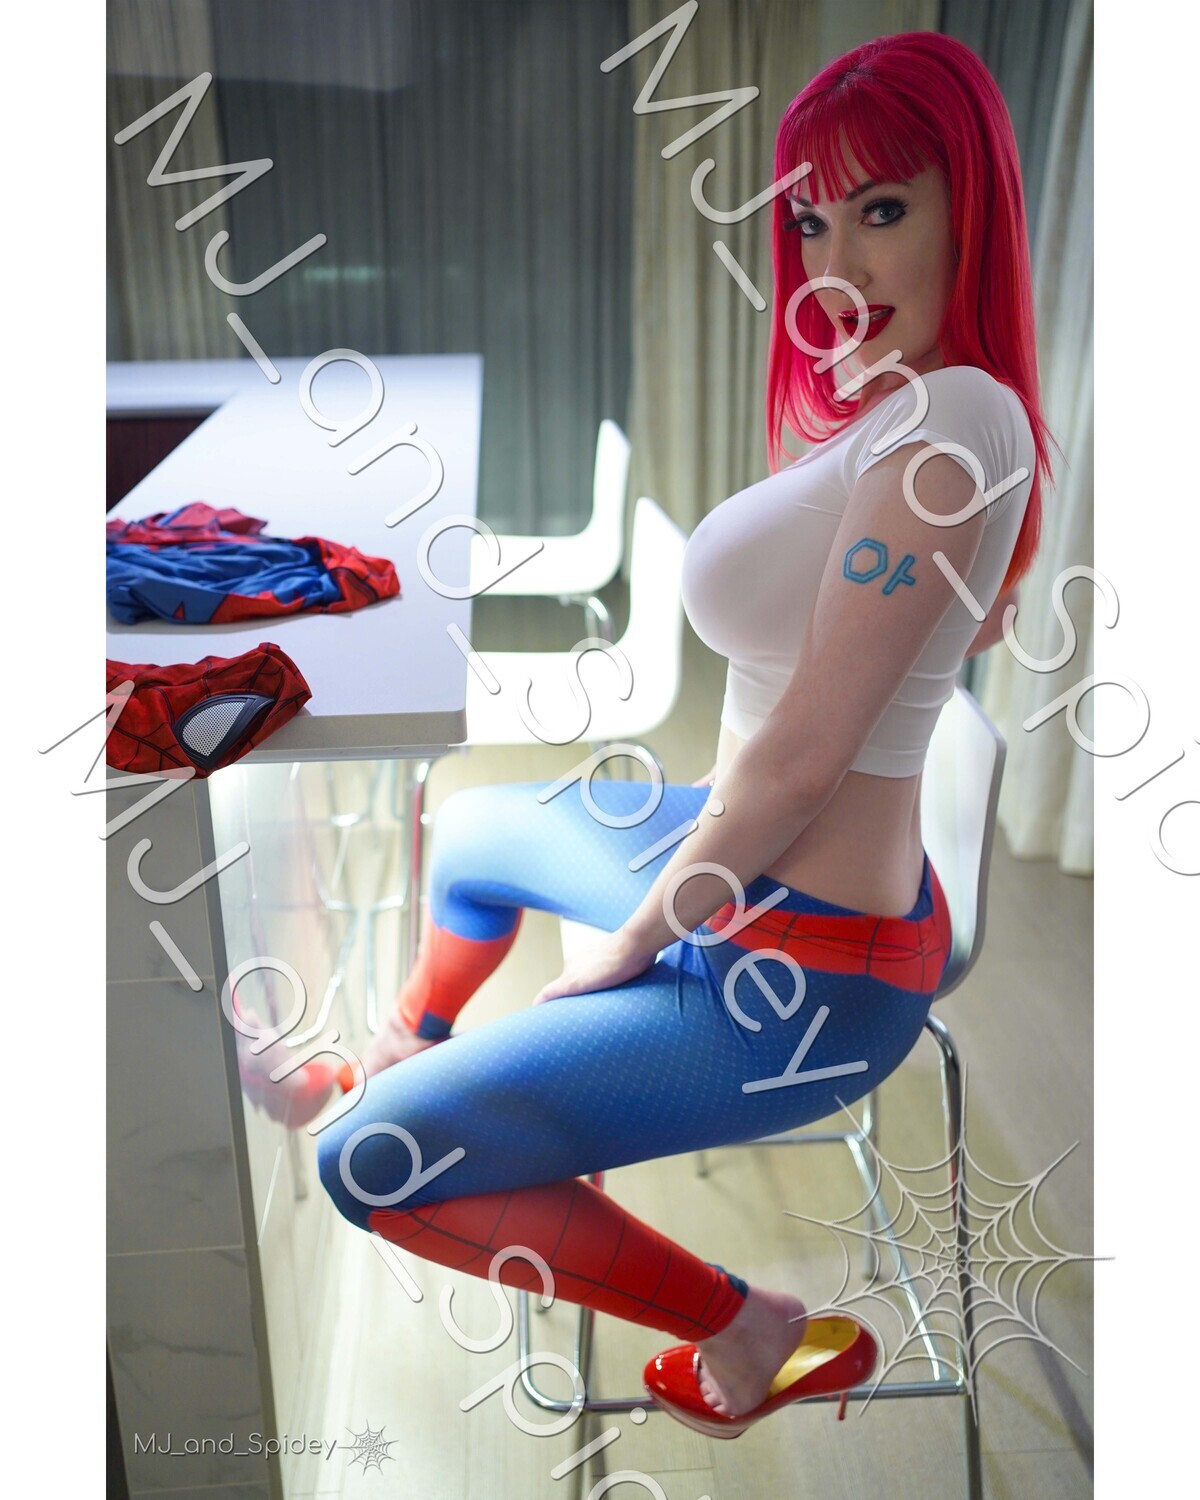 Marvel - Spider-Man - Mary Jane Watson - Leggings 2 - Digital Cosplay Image (@MJ_and_Spidey, MJ and Spidey, Comics)